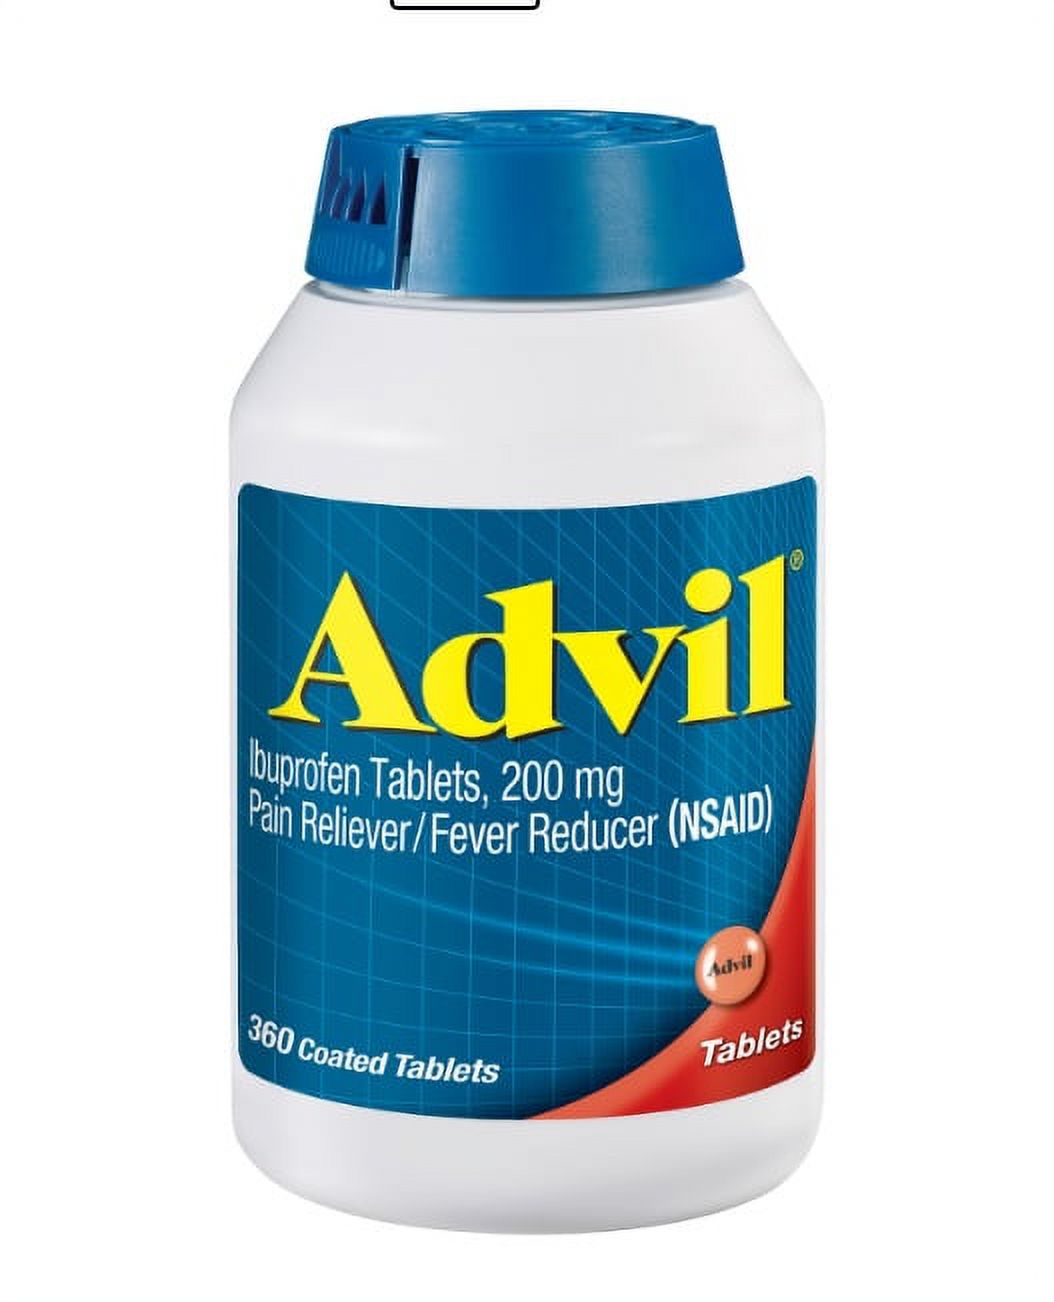 Advil Ibuprofen 200 Mg., Pain Reliever/Fever Reducer, 360 Tablets - image 1 of 6